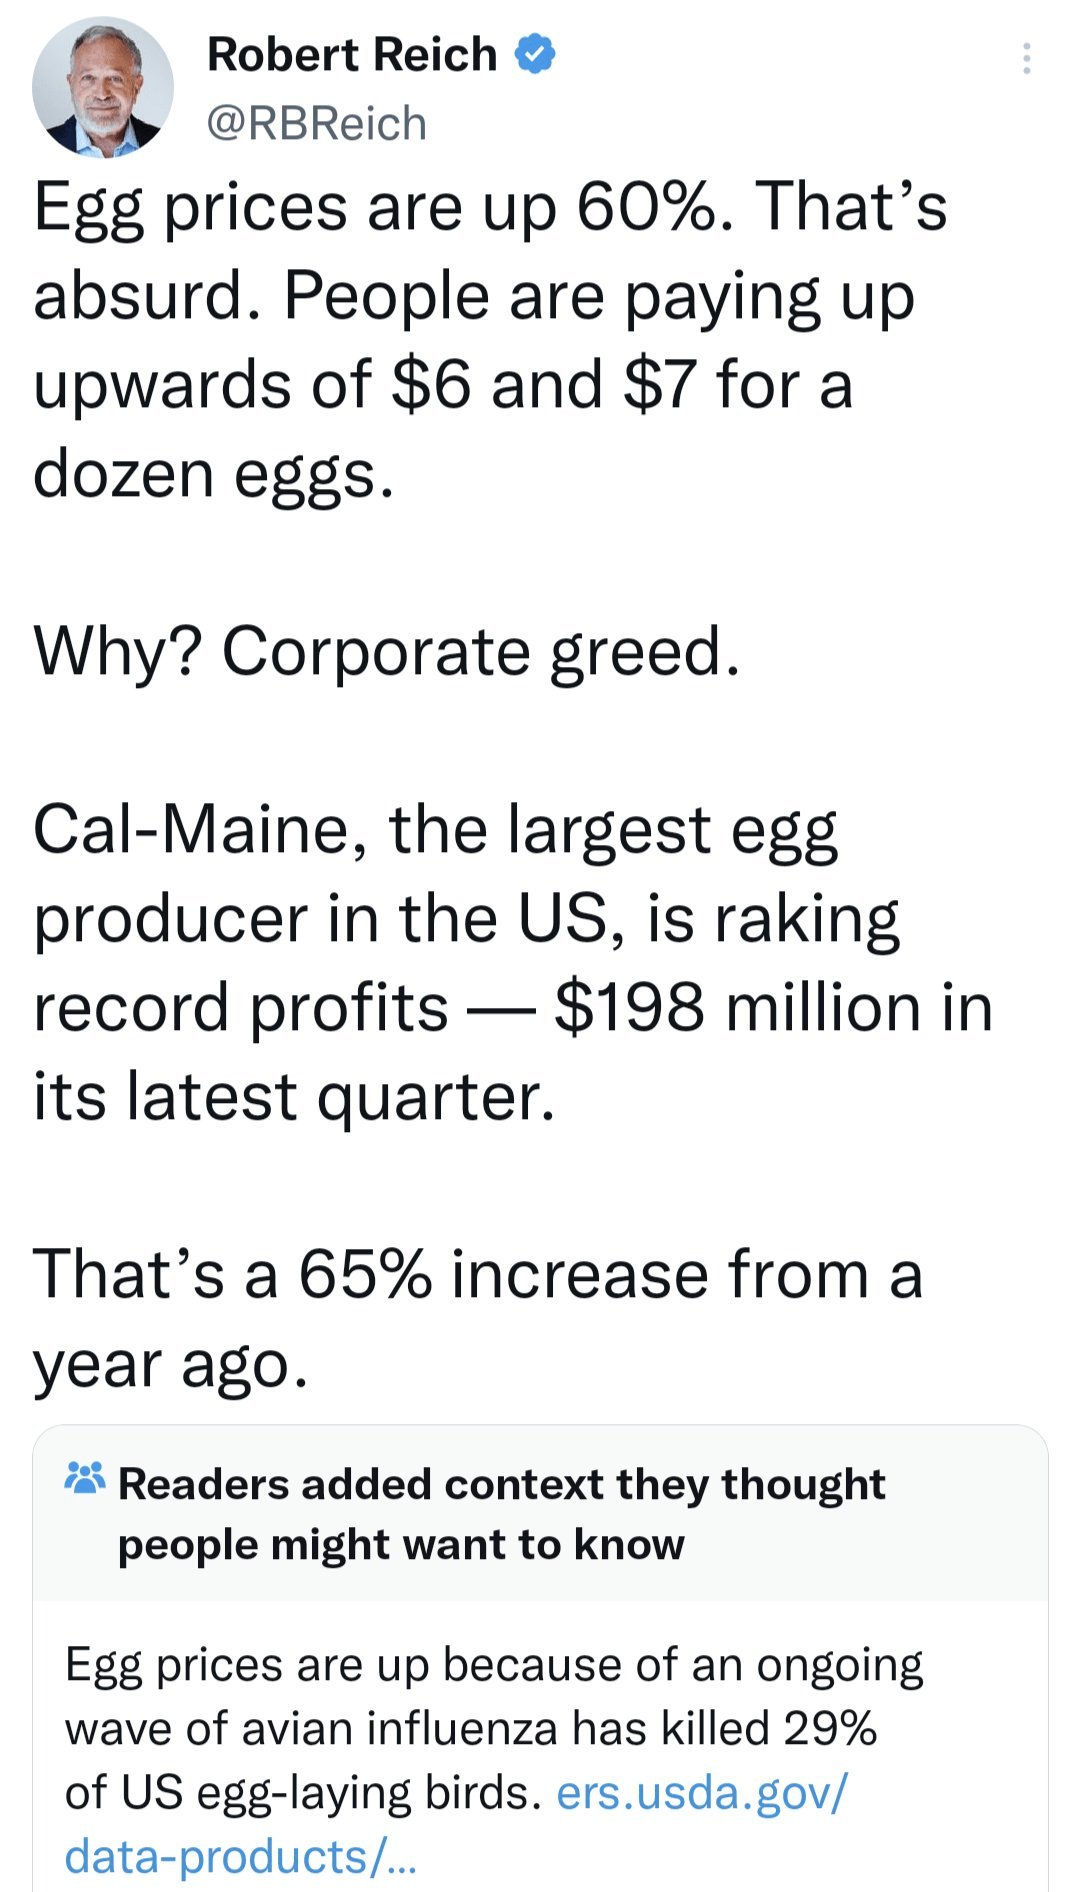 An image of a tweet from Robert Reich discussing why egg prices are up 